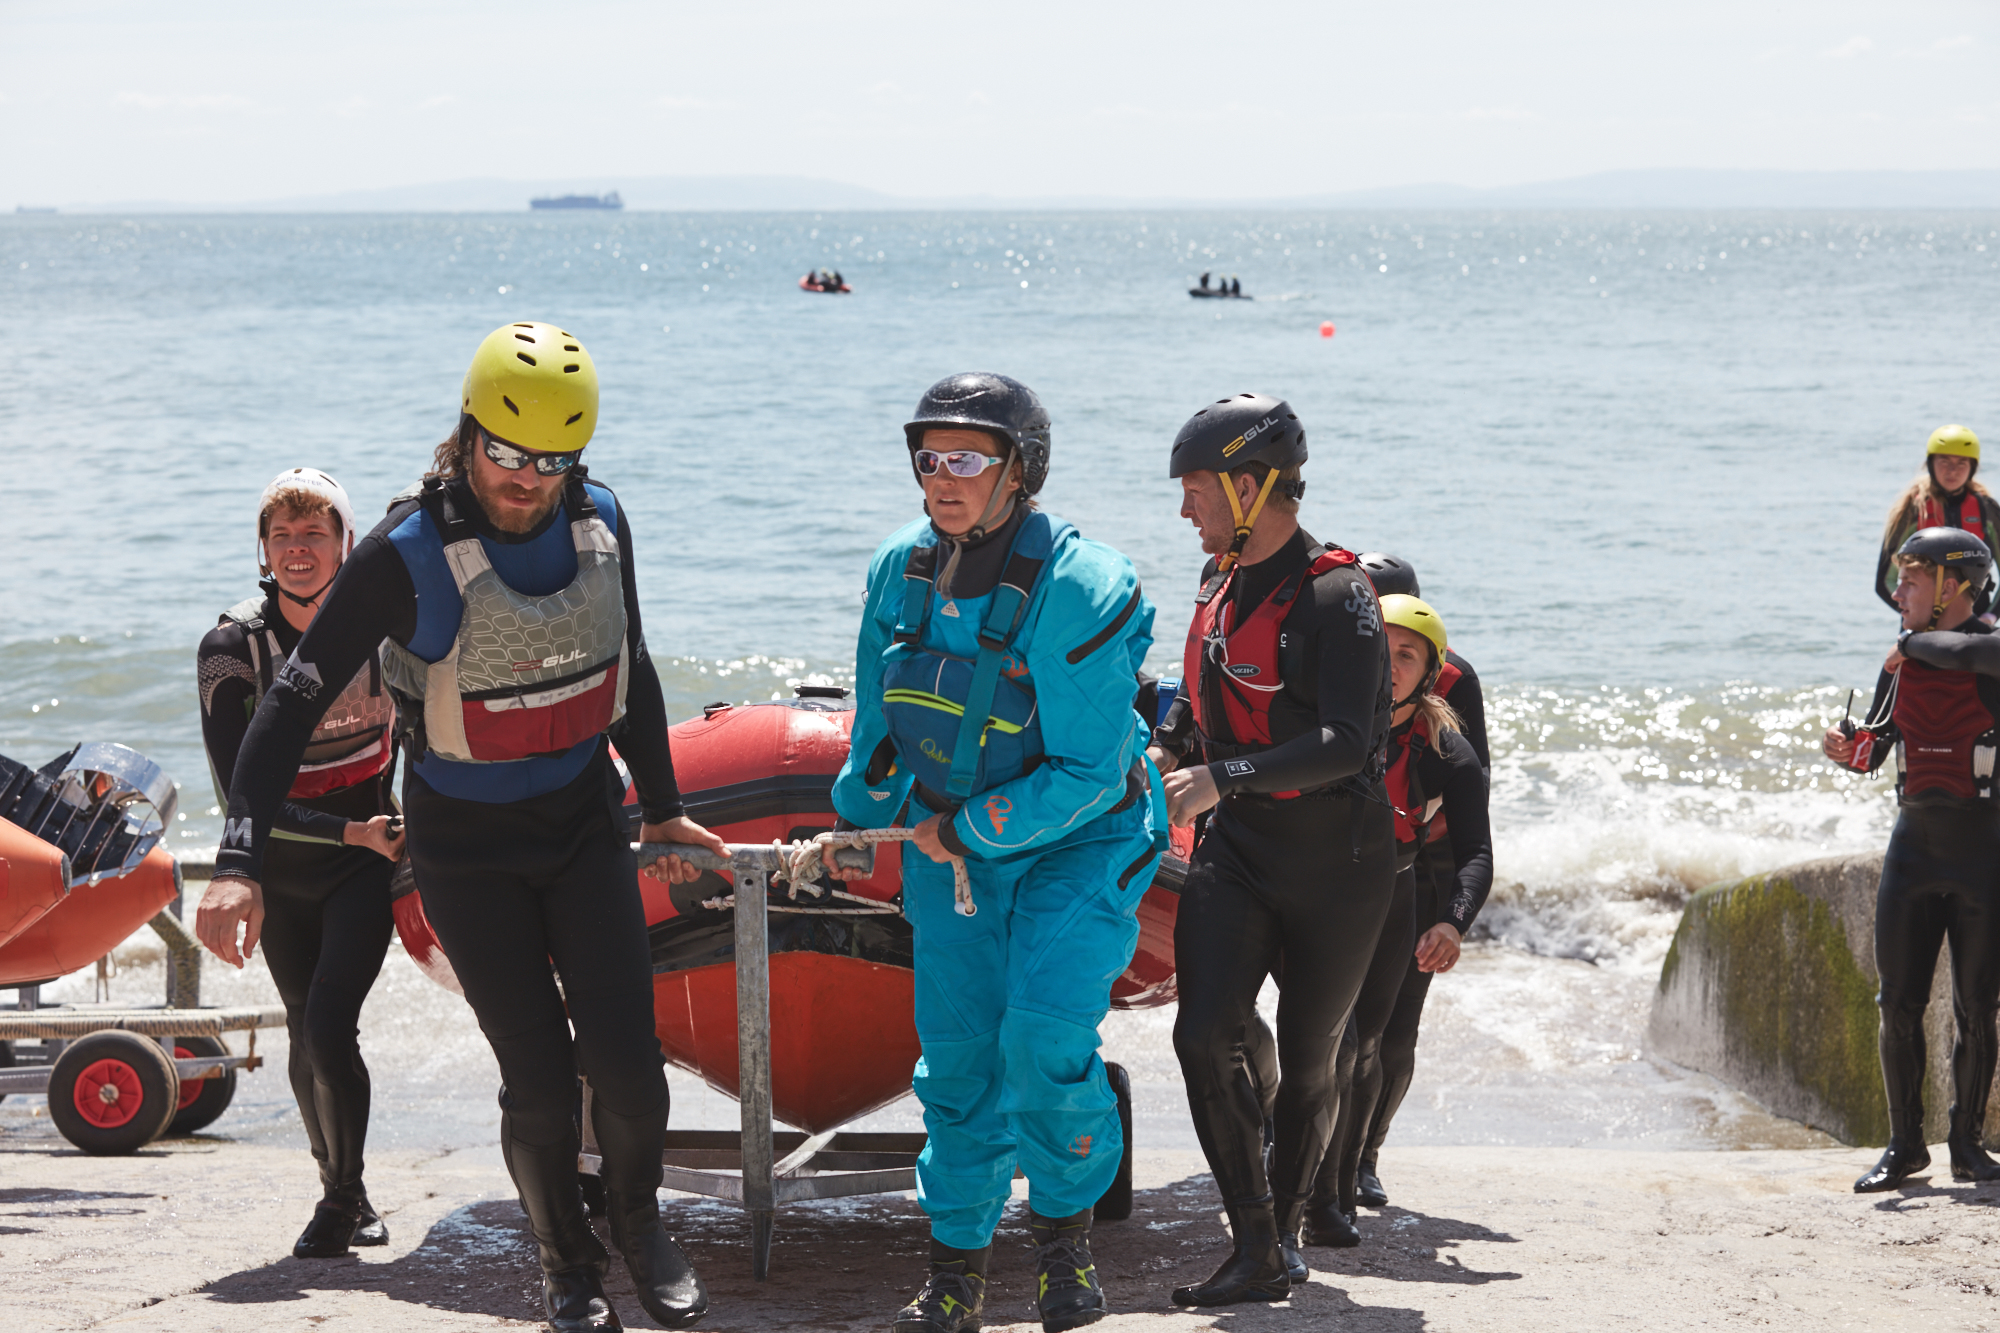 A group of people in wetsuits and lifejackets bringing a lifeboat out of the water